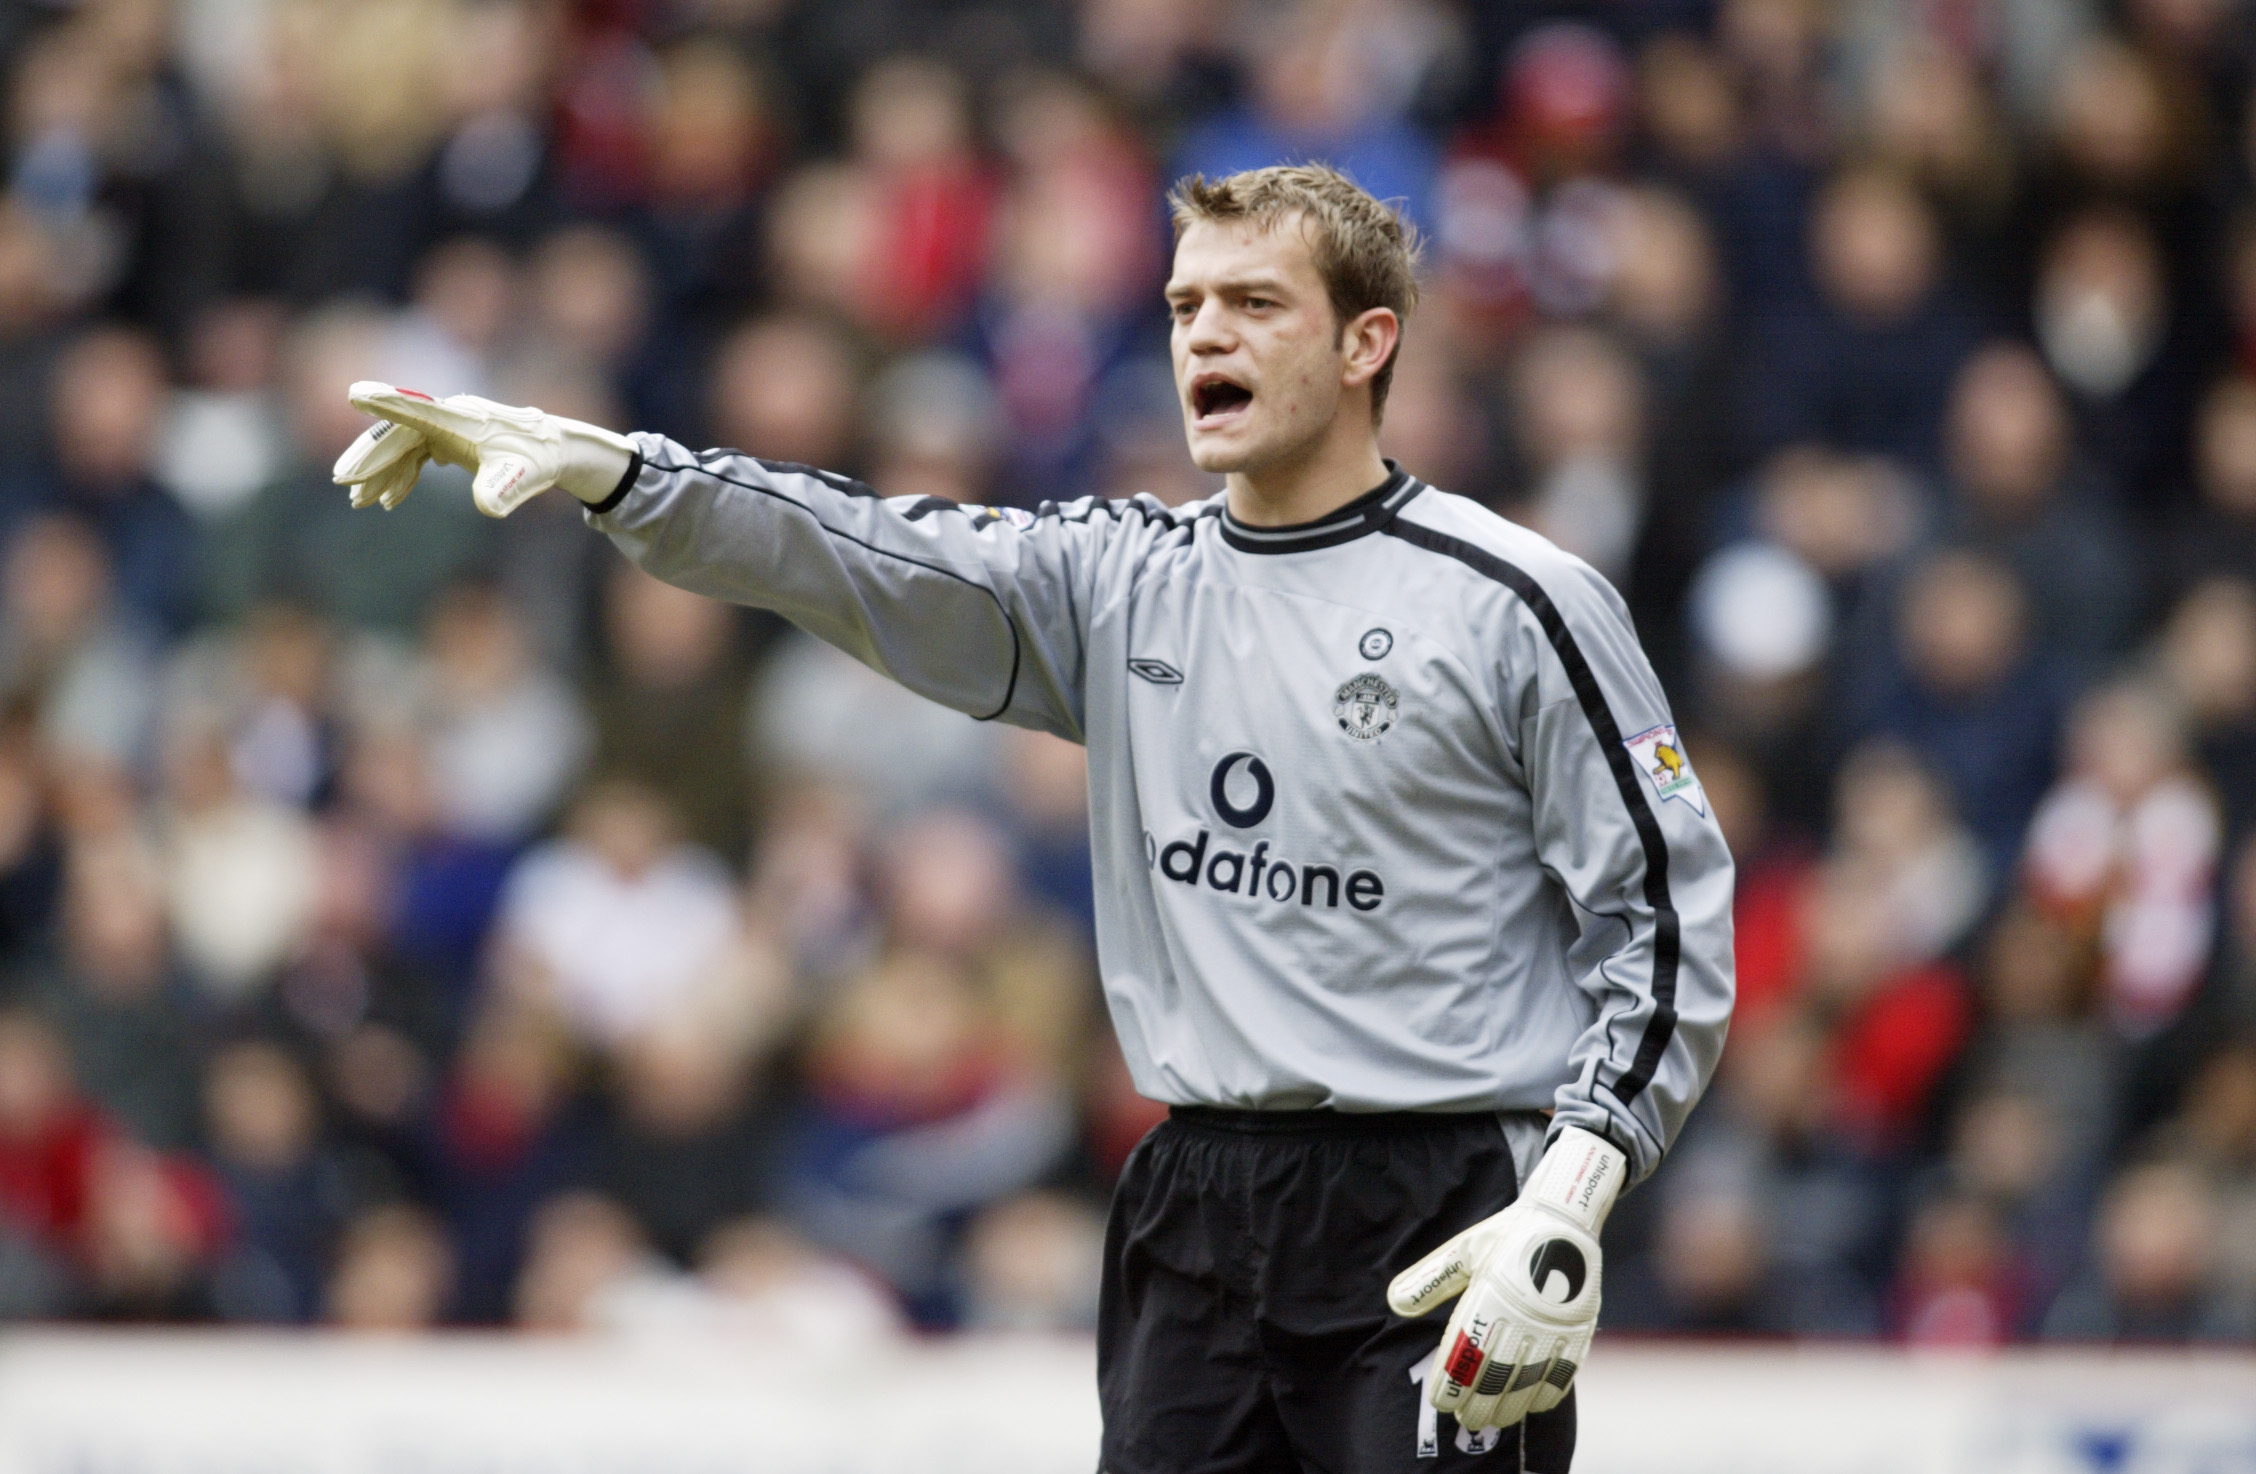 10 Feb 2002:  Roy Carroll of Manchester United in action during the FA Barclaycard Premiership match against Charlton Athletic played at The Valley, in London. Manchester United won the match 2-0. DIGITAL IMAGE. \ Mandatory Credit: Phil Cole/Getty Images